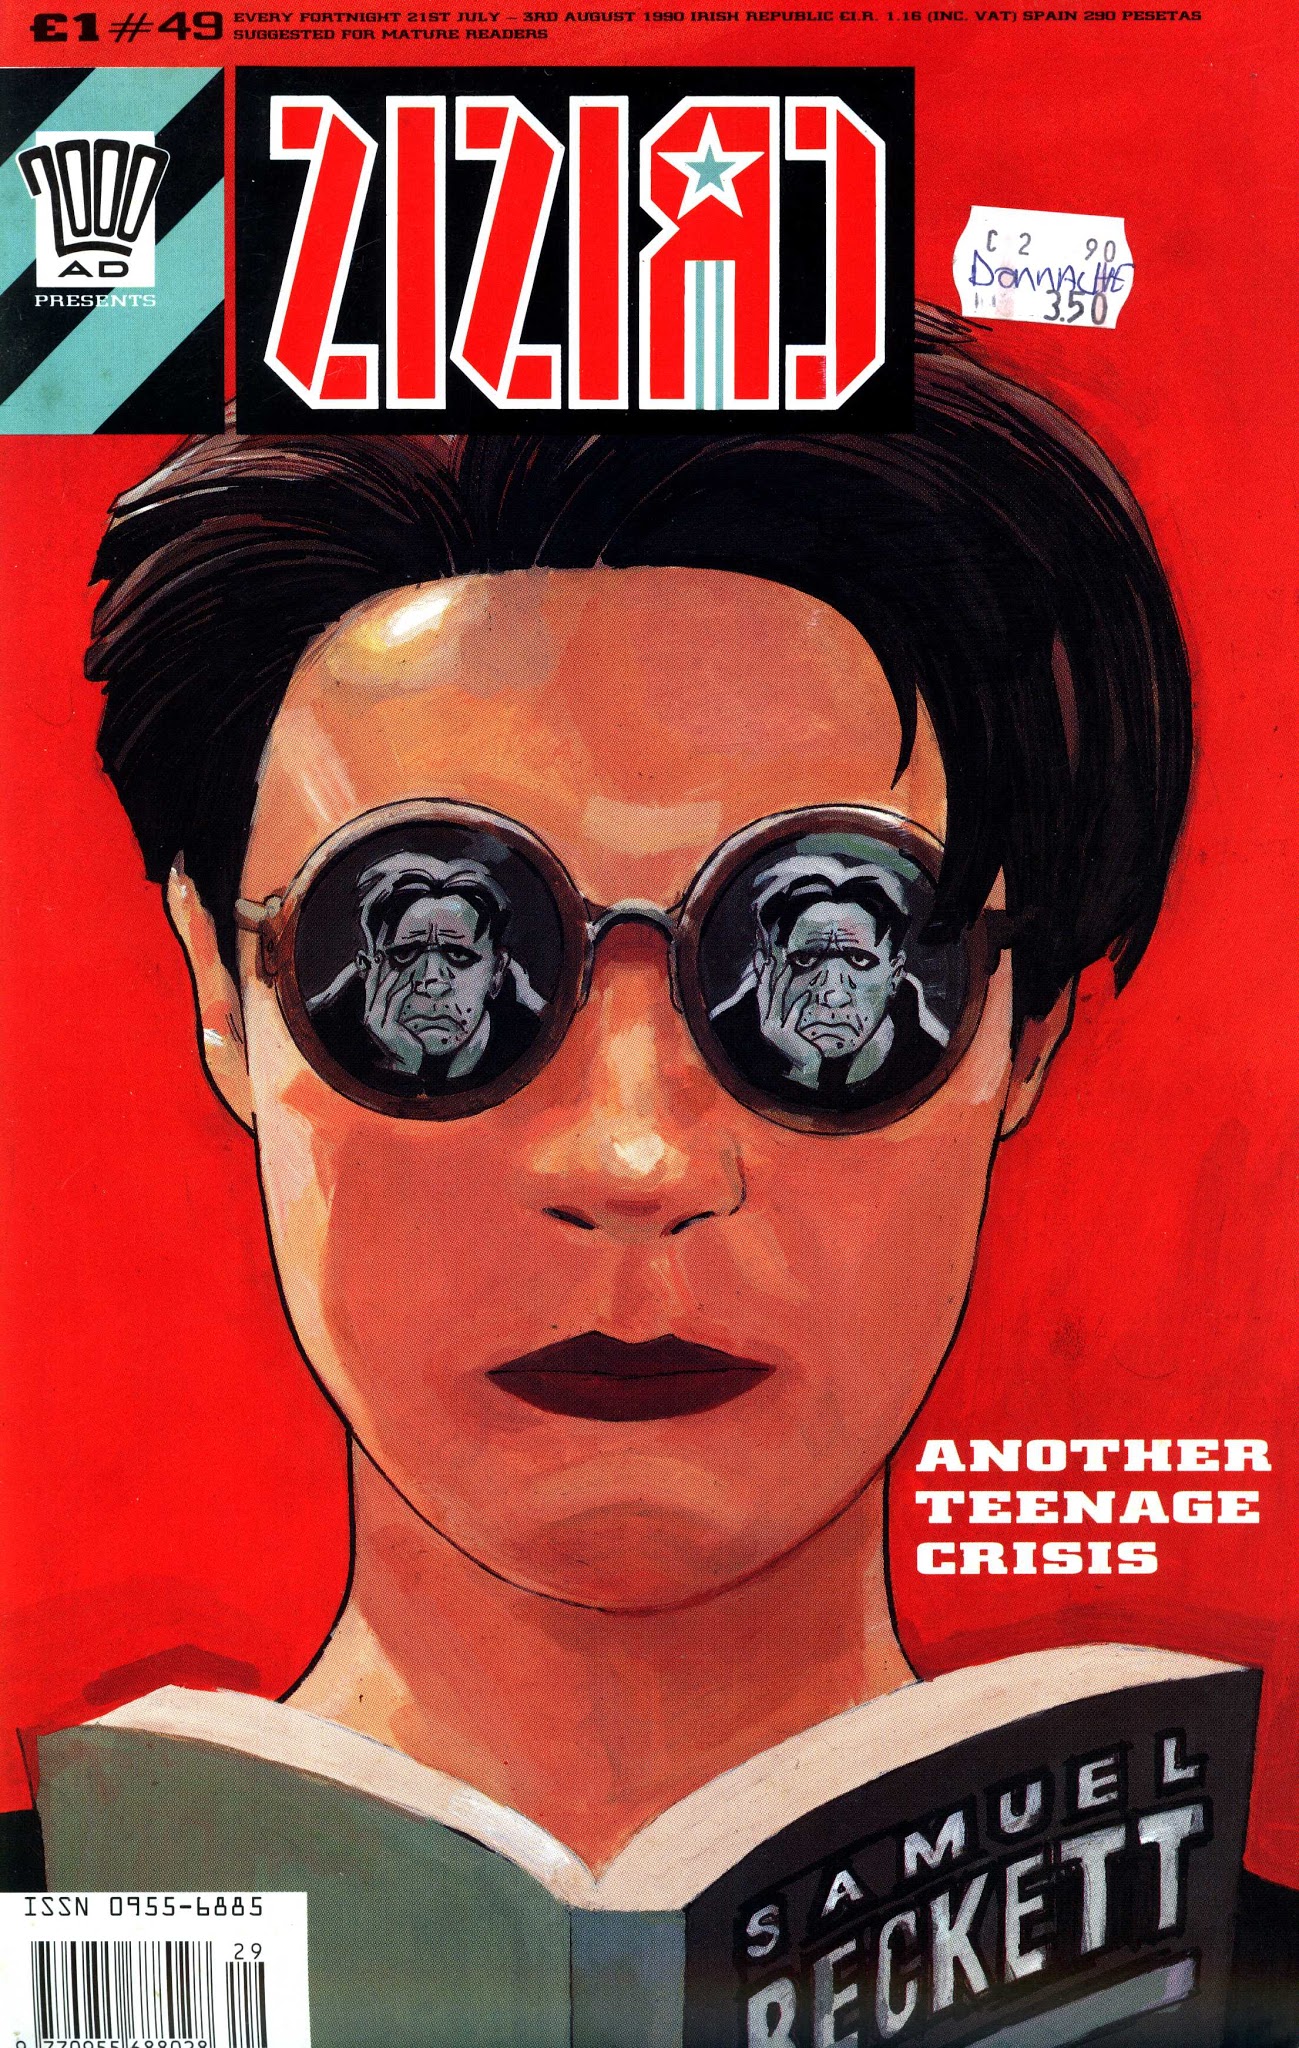 Read online Crisis comic -  Issue #49 - 1